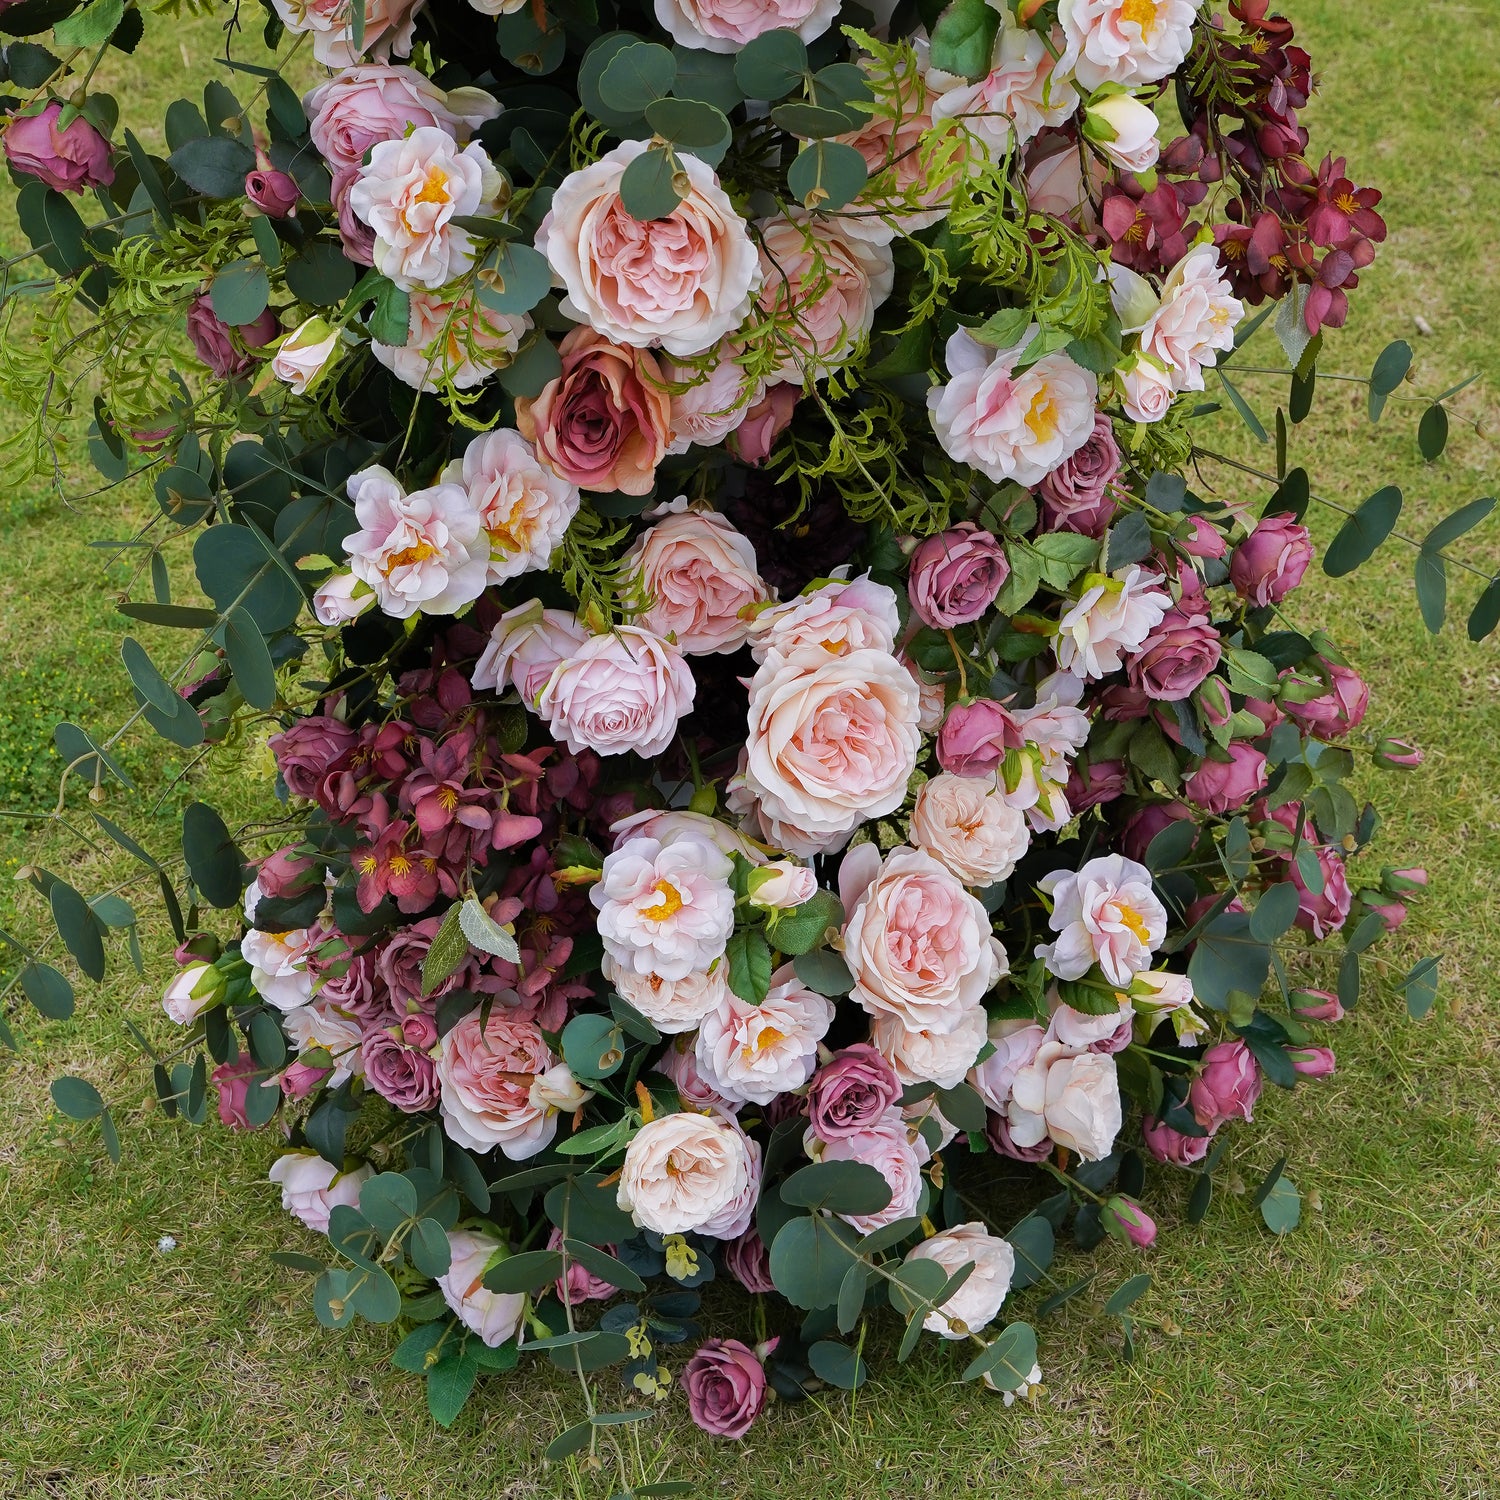 Darcy:2023 New Wedding Party Background Floral Arch Decoration Including Frame Rose Morning